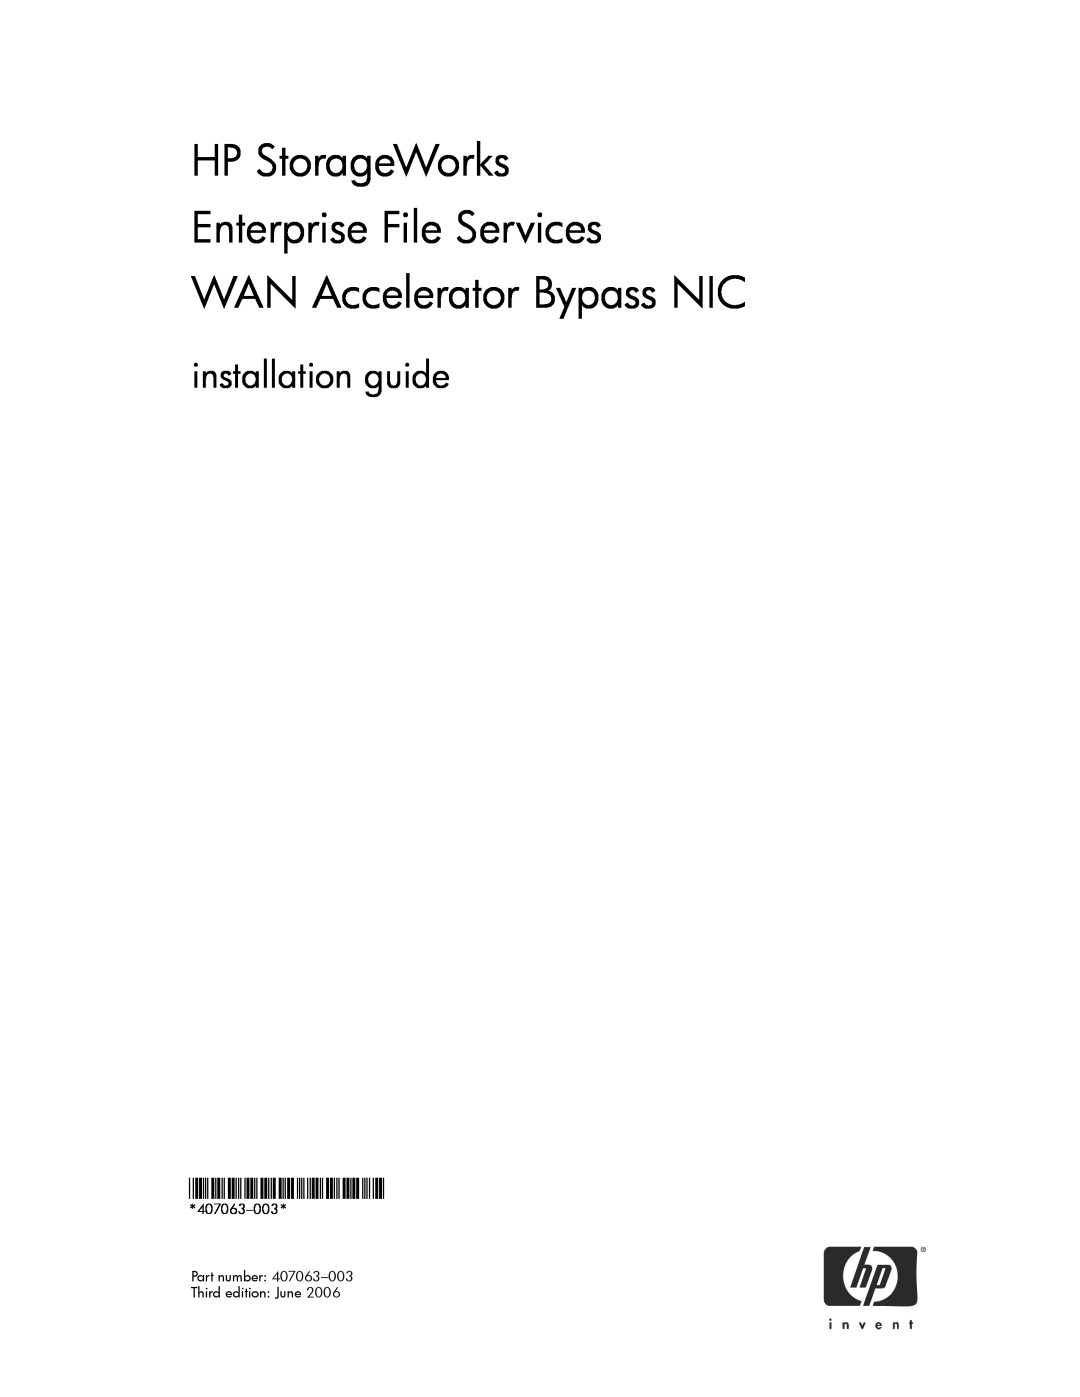 HP manual HP StorageWorks Enterprise File Services WAN Accelerator Bypass NIC, 407063-003, installation guide 